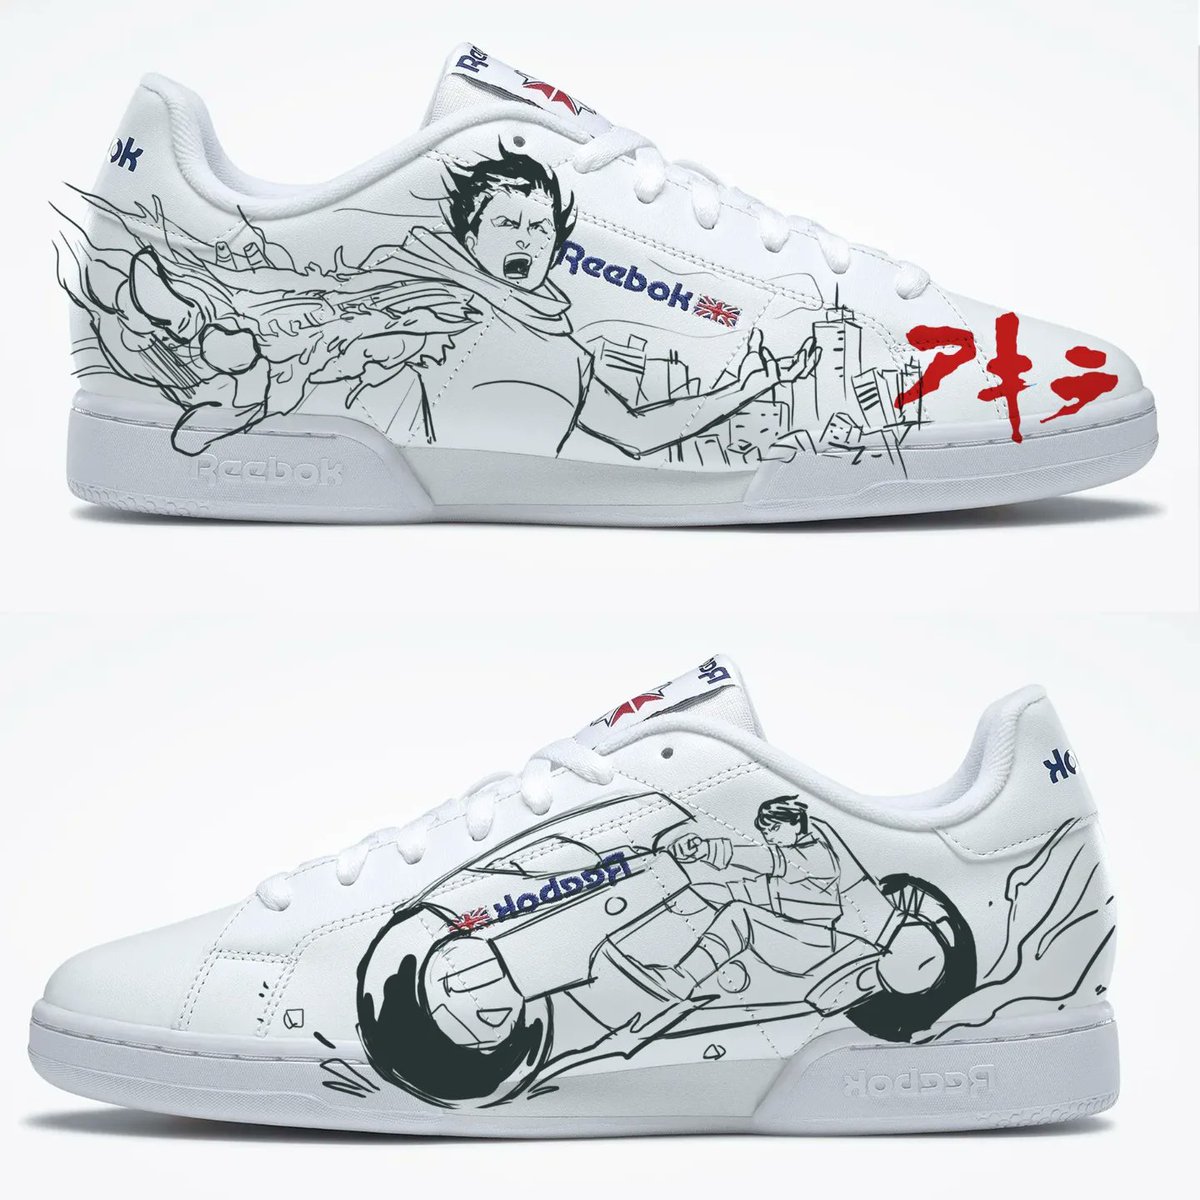 AKIRA - アキラ 👟 commission

#customsneakers #customshoes #anime